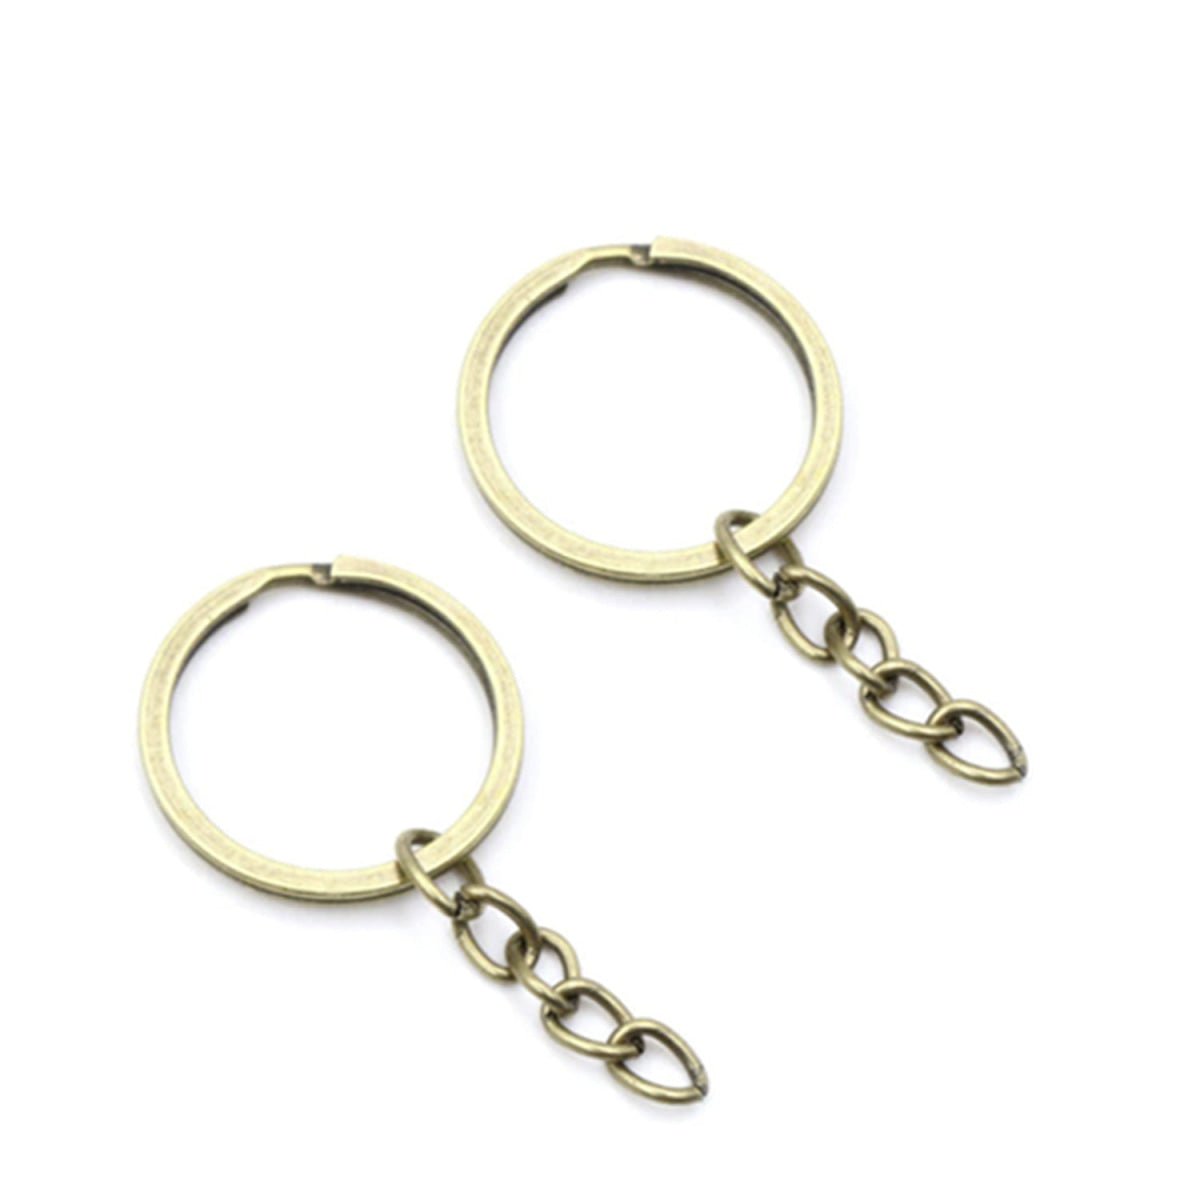 20pcs 30mm Rose Gold Ancient Keyring Keychain Split Ring Chain Key Rings Key Chains - Bronze - - Asia Sell